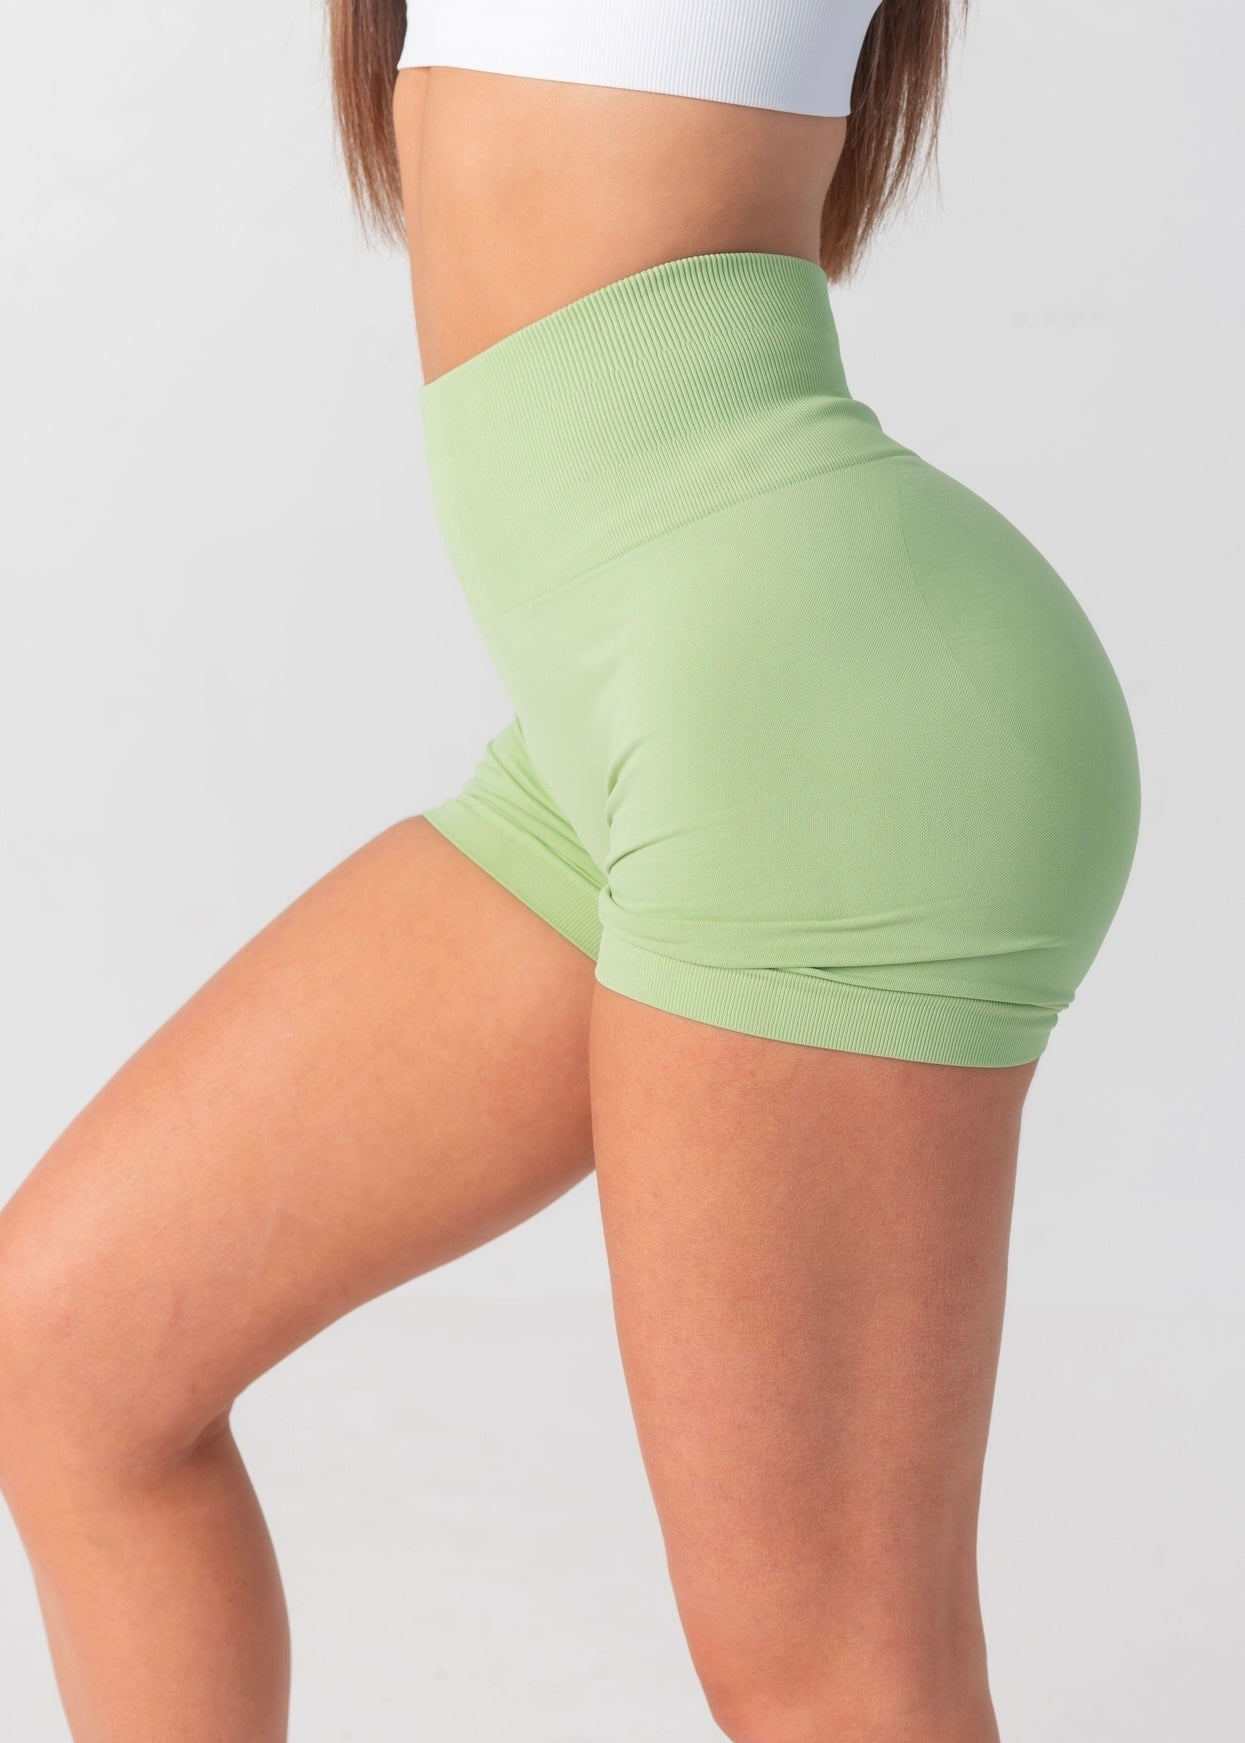 ULTIMATE SEAMLESS SCRUNCH SHORTS 2.0 - LIME